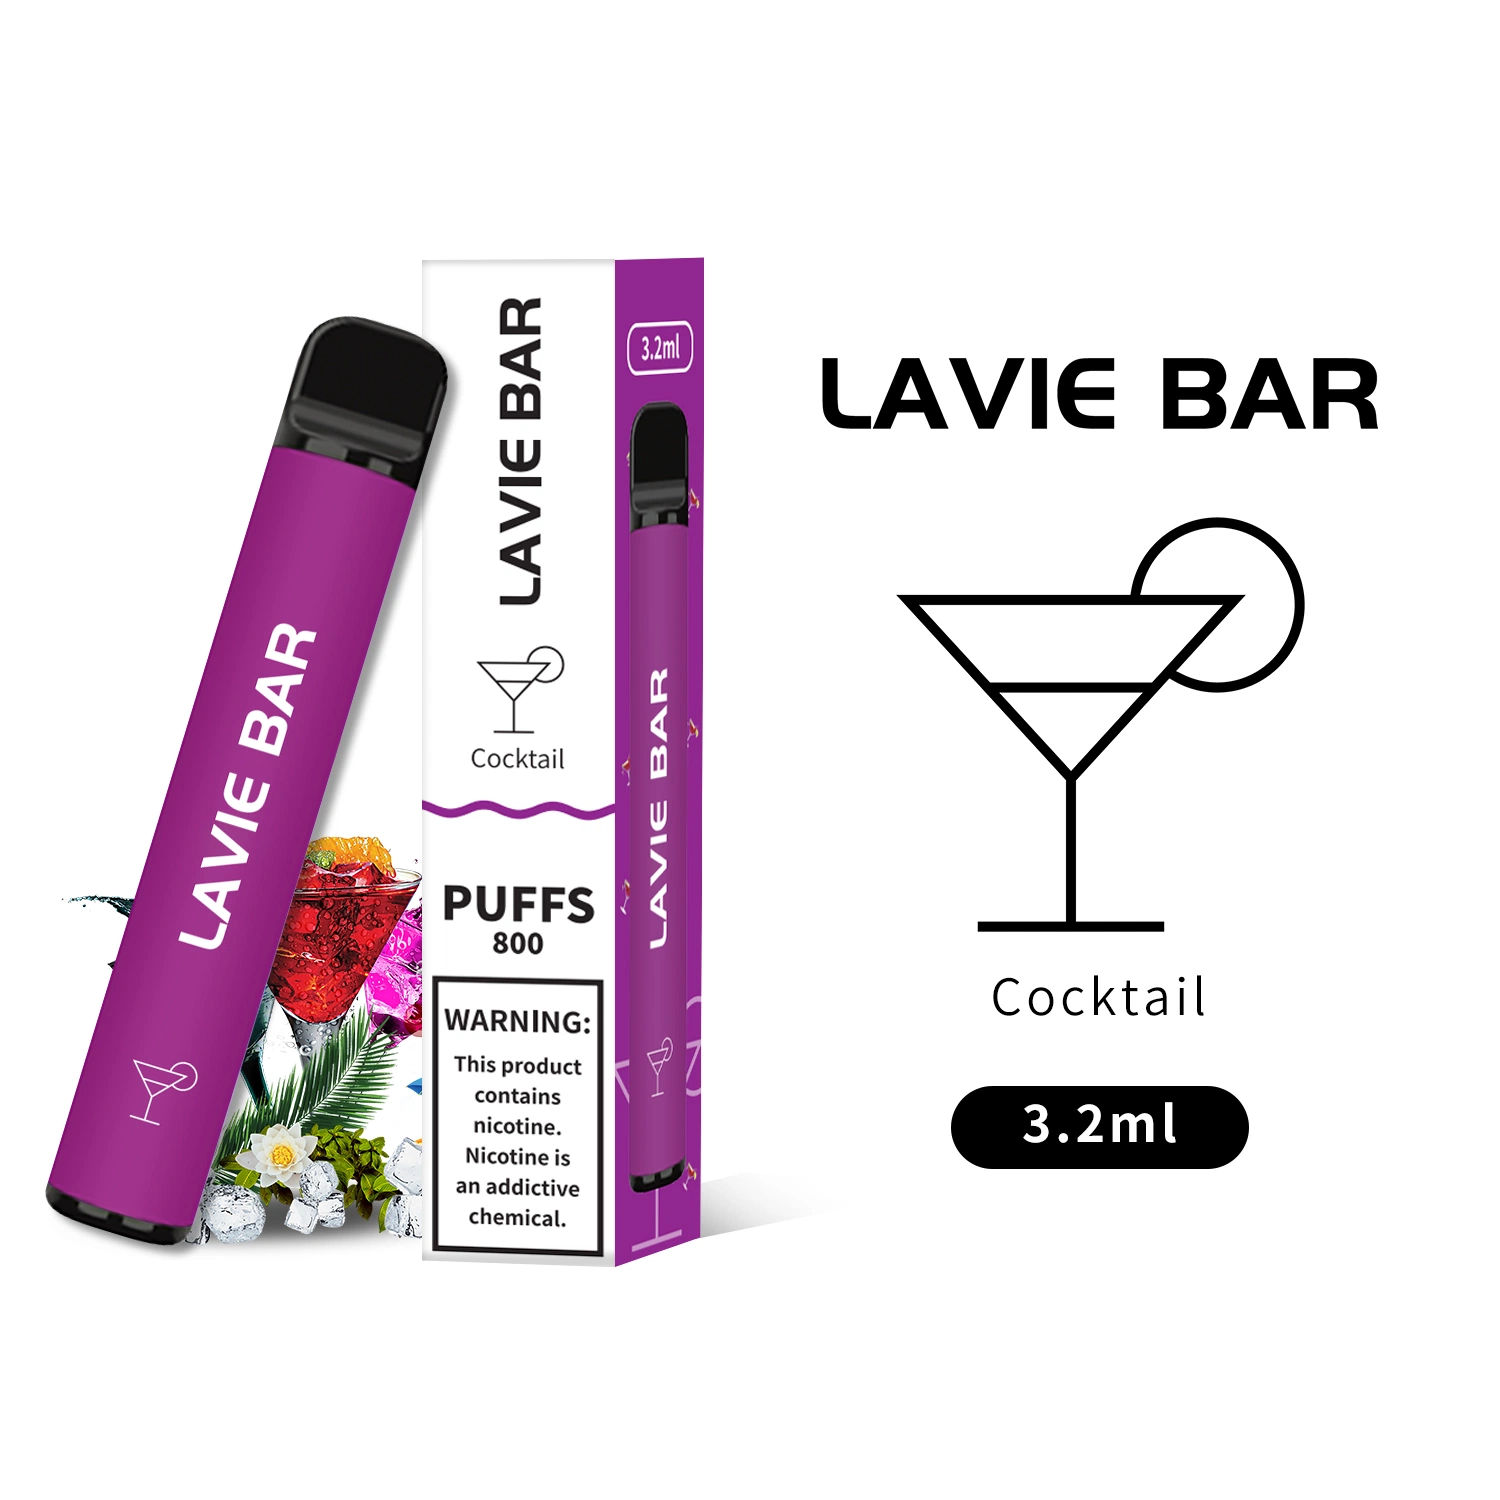 800 Puffs Disposable/Chargeable Vape Pen with Fruit Flavors